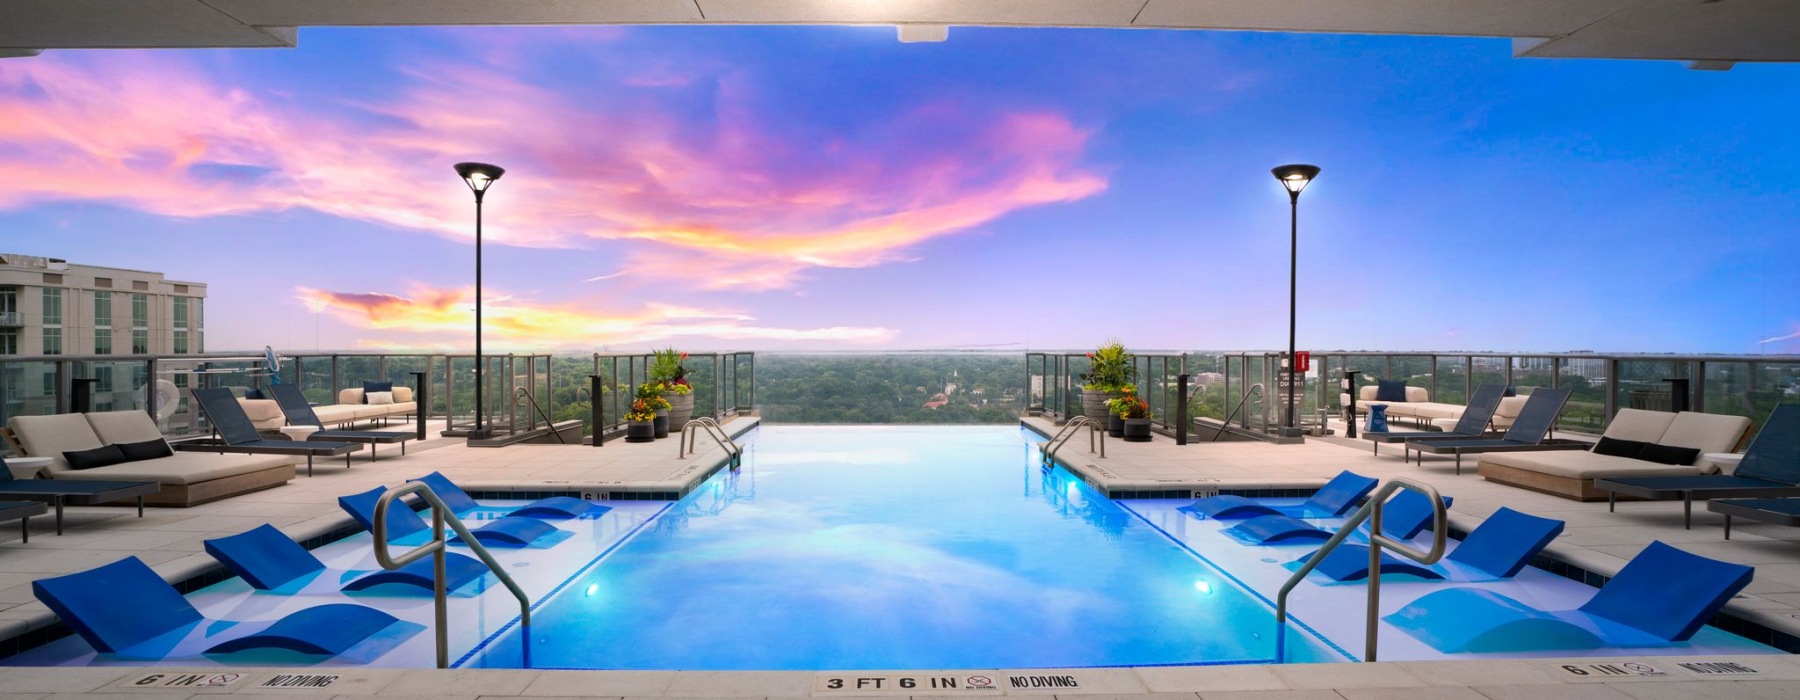 Rooftop Infinity Pool with Lounge Seating at Sunset